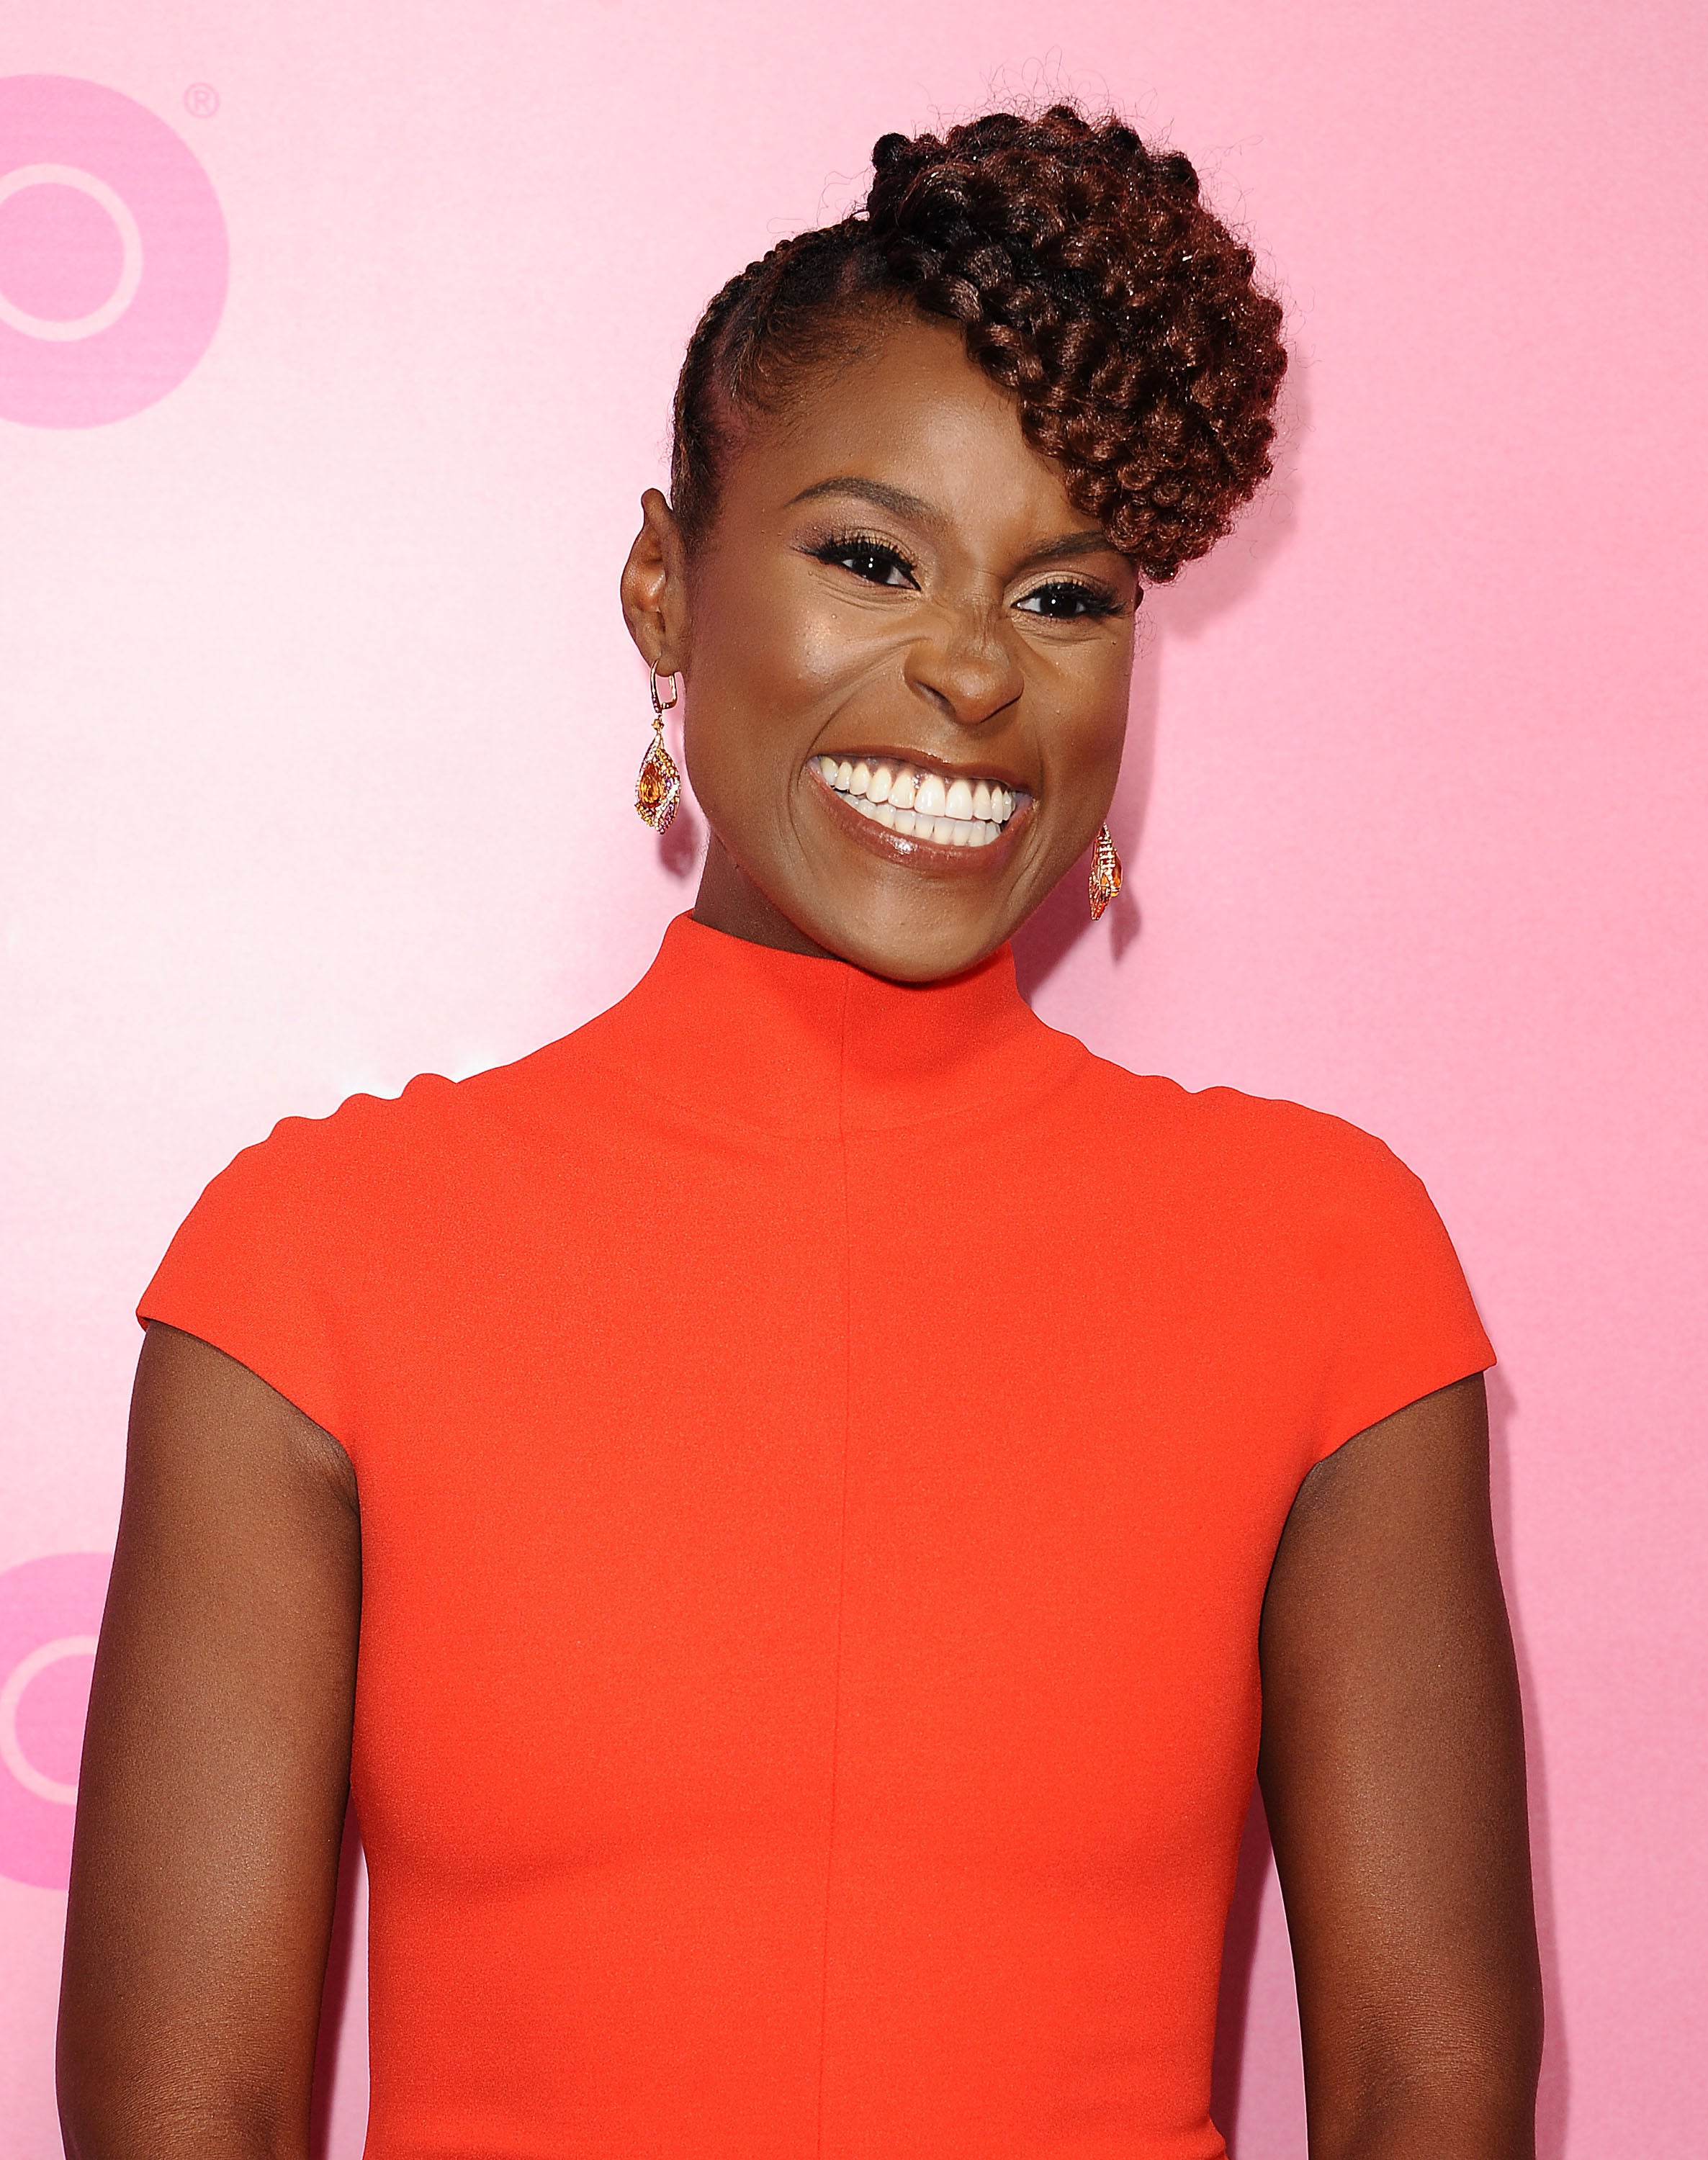 Issa Rae Had The Best Response To Fans Who Complained They Couldn’t Watch ‘Insecure’